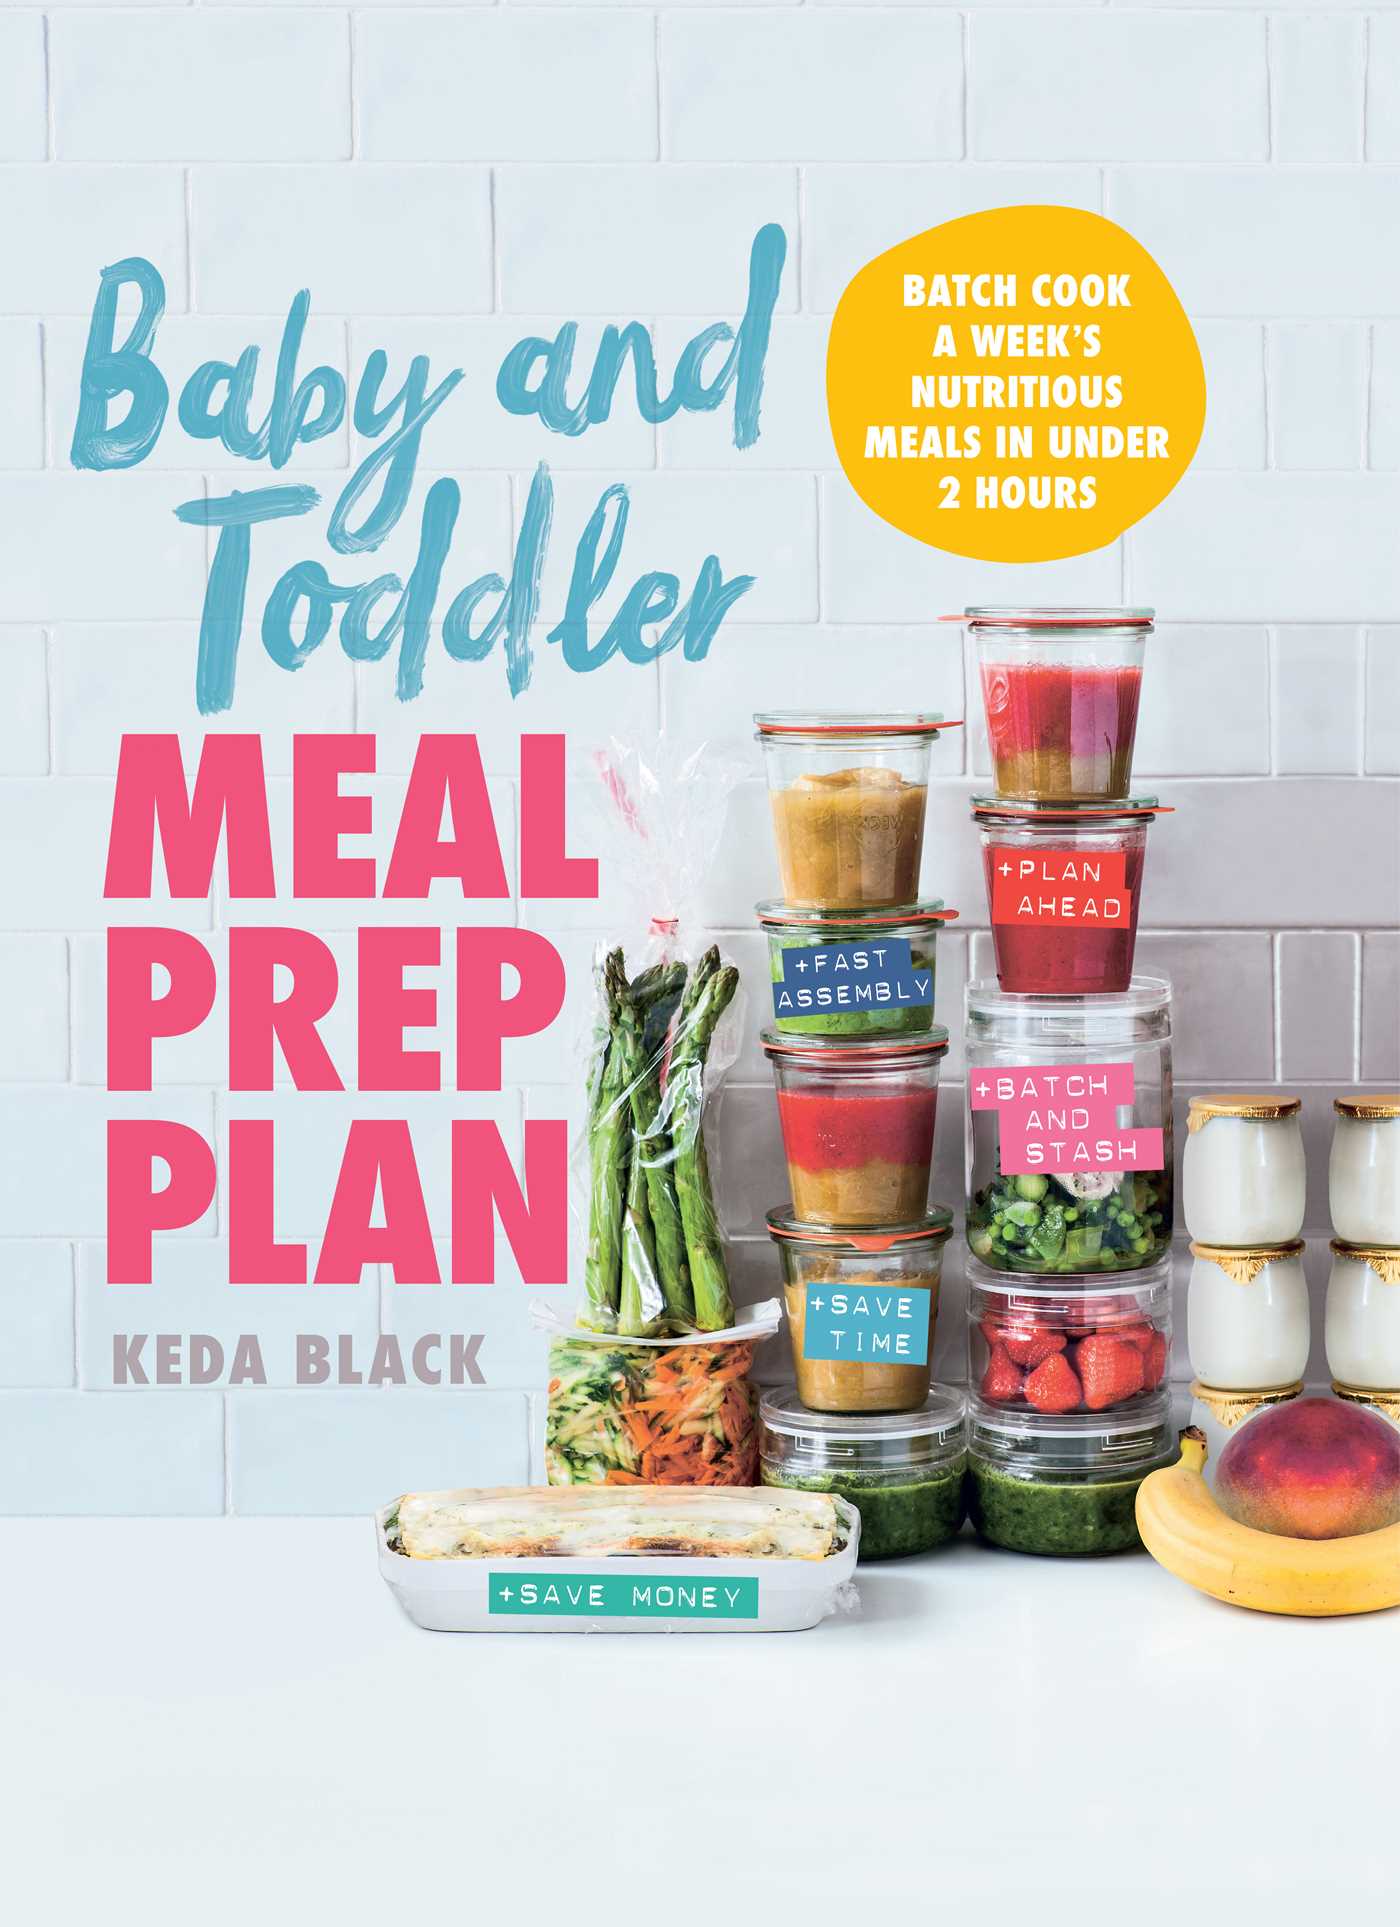 Baby and Toddler Meal Prep Plan : Batch Cook a Week's Nutritious Meals in Under 2 Hours | Cookbook